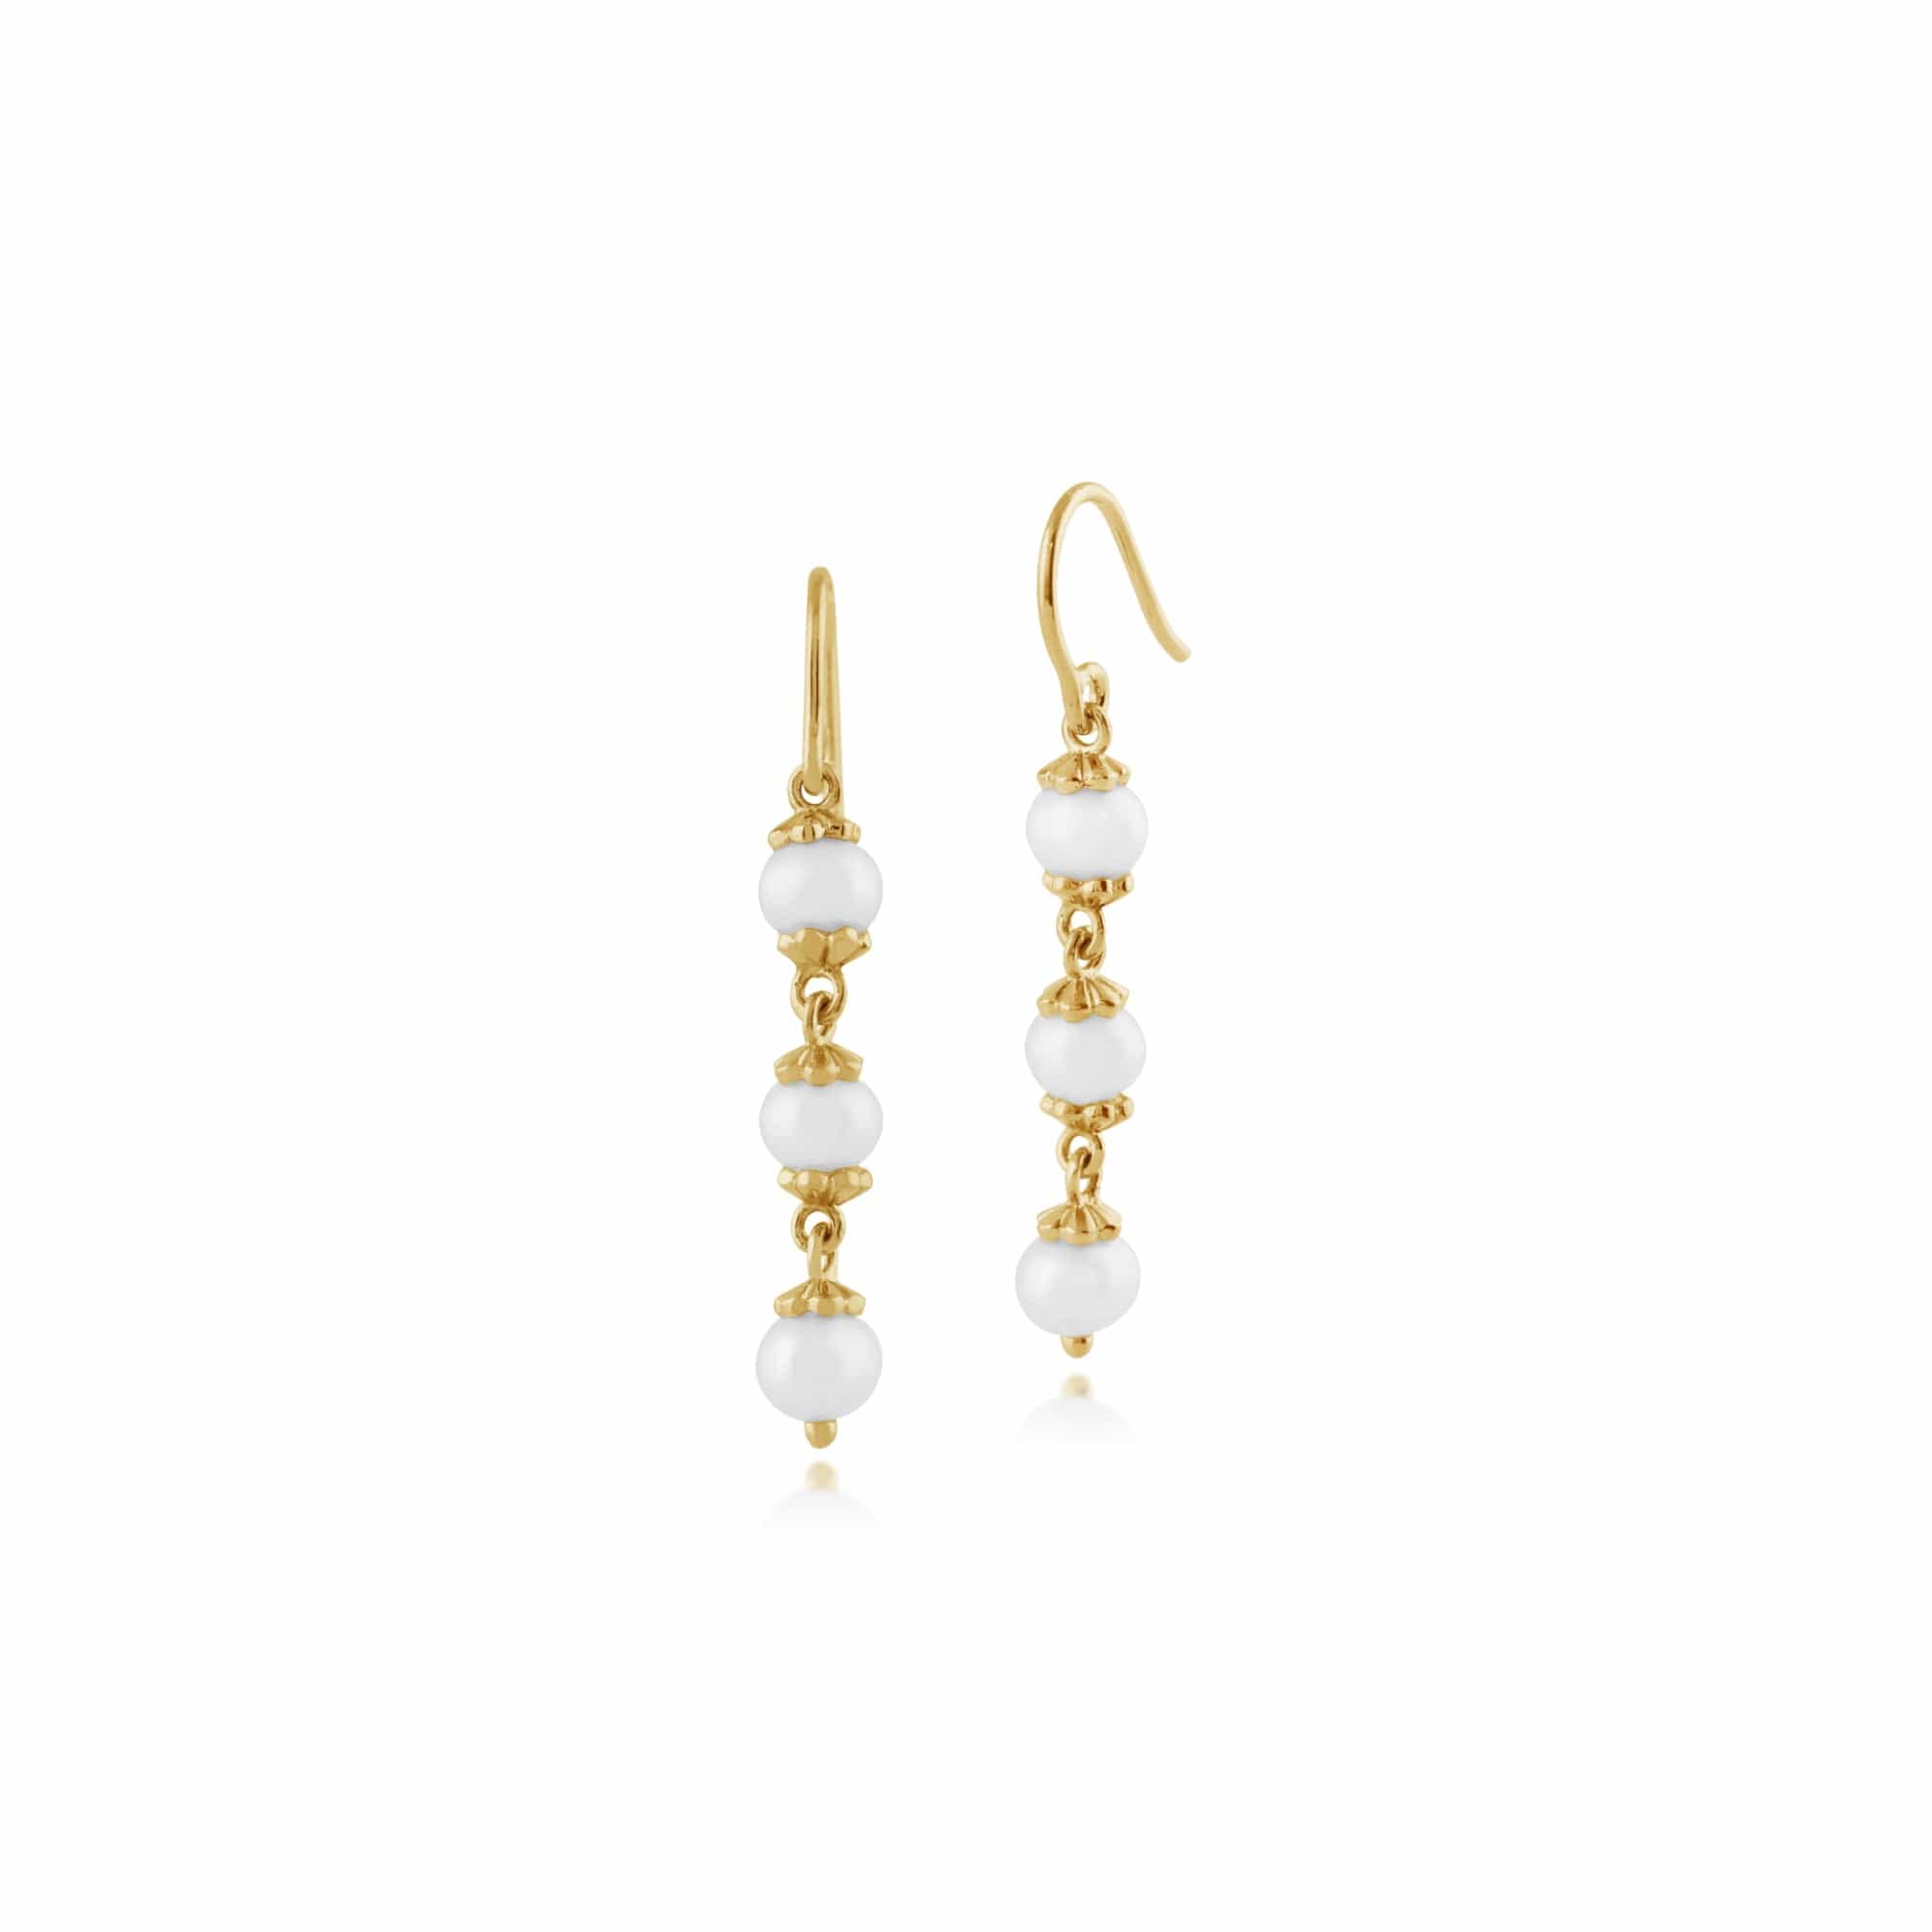 Gemondo 925 Gold Plated Sterling Silver 3.13ct Freshwater Pearl Drop Earrings Image